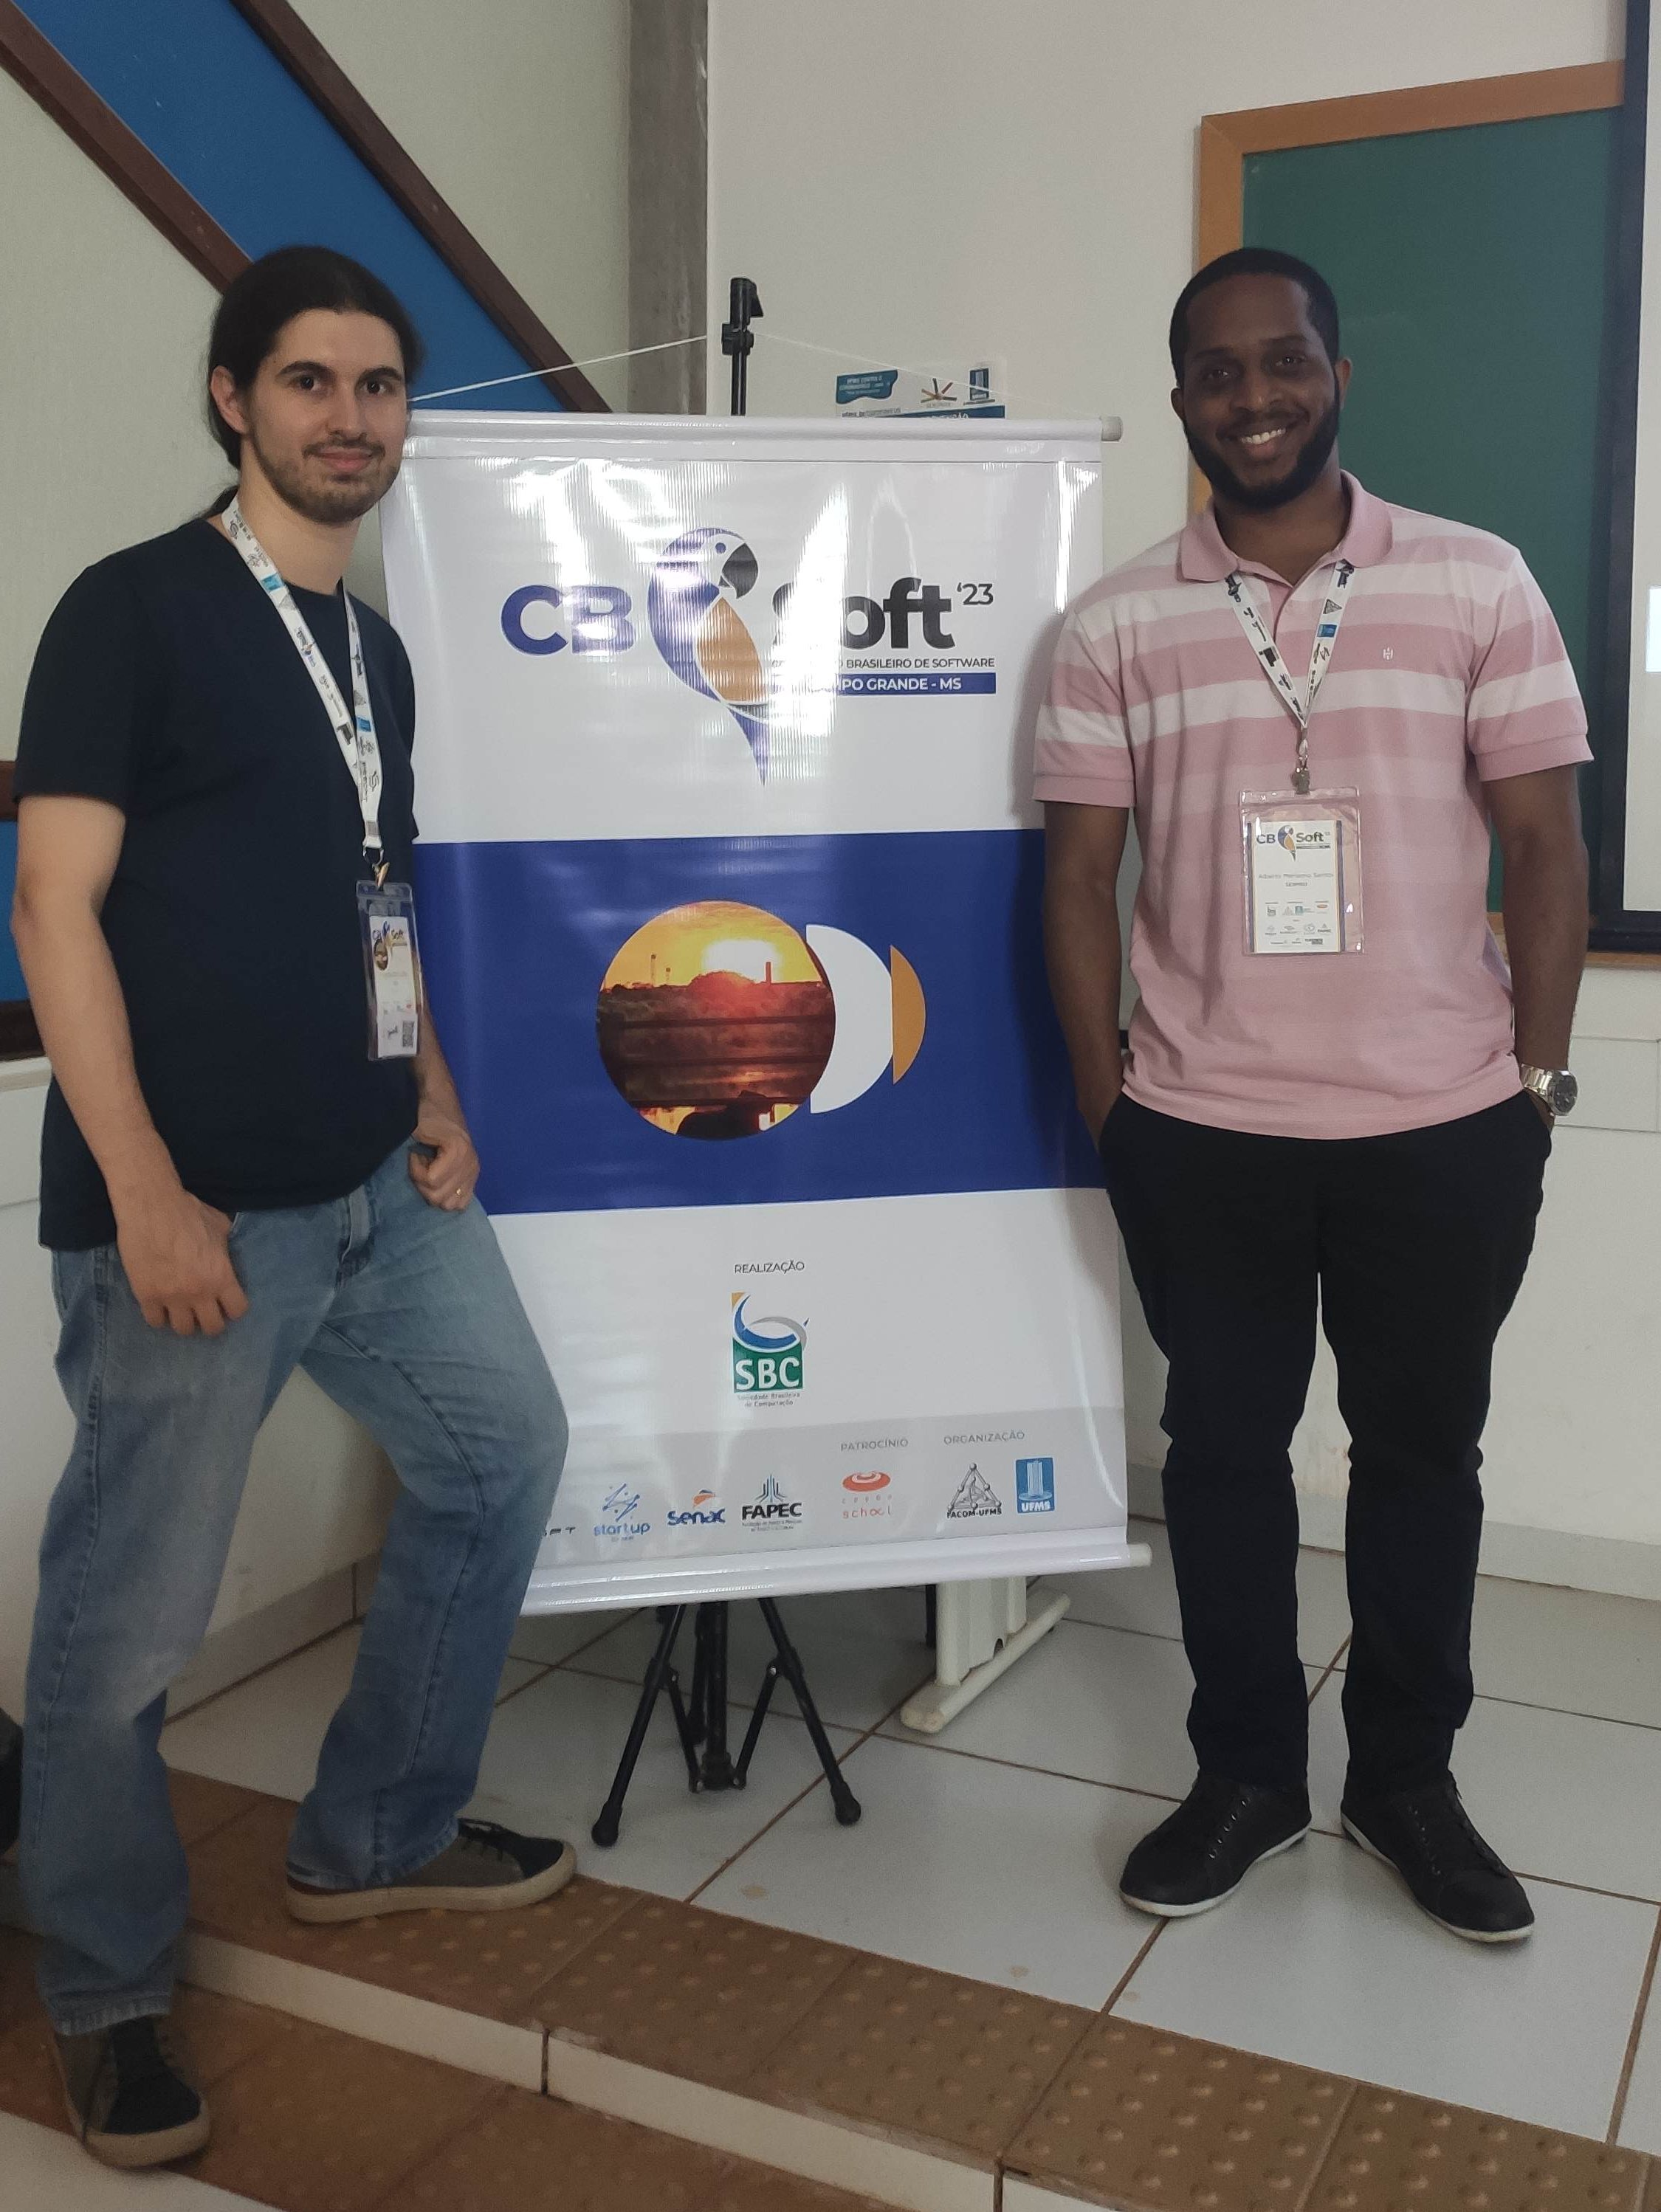 Leonardo and Alberto, presenters of the work, with a CBSoft banner